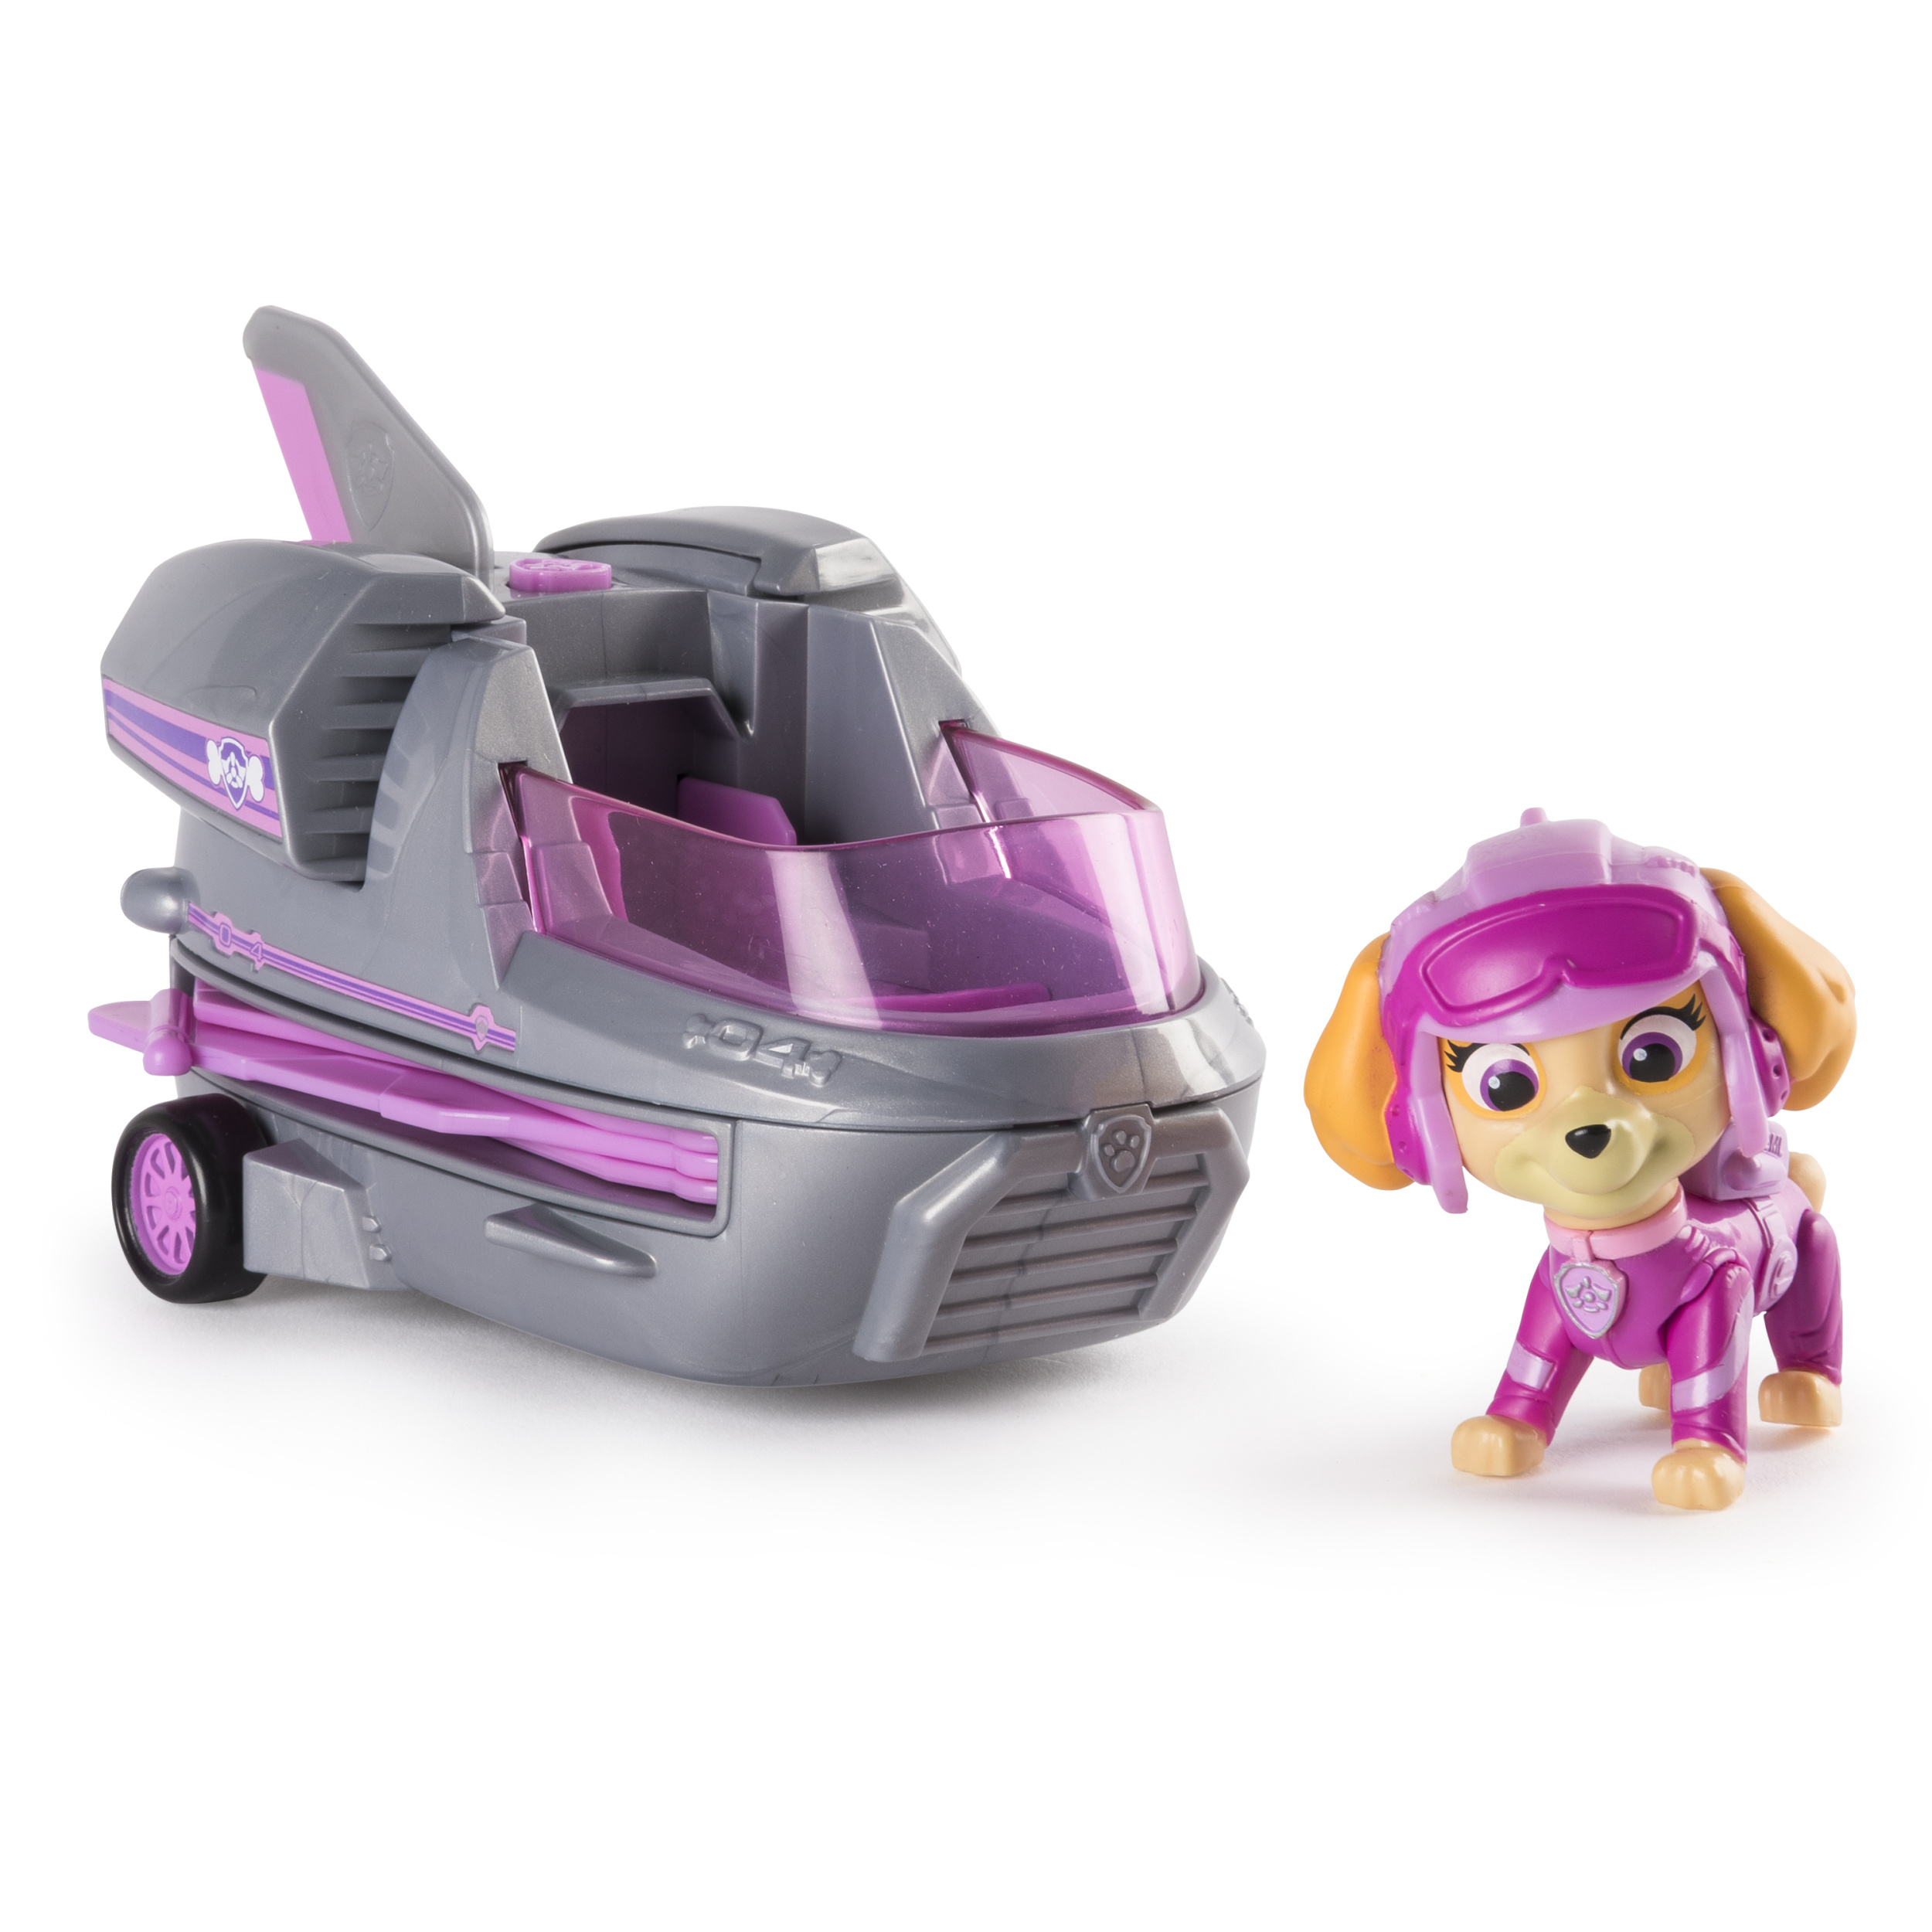 PAW Patrol Skye’s Rescue Jet with Extendable Wings Play Vehicle - image 1 of 5